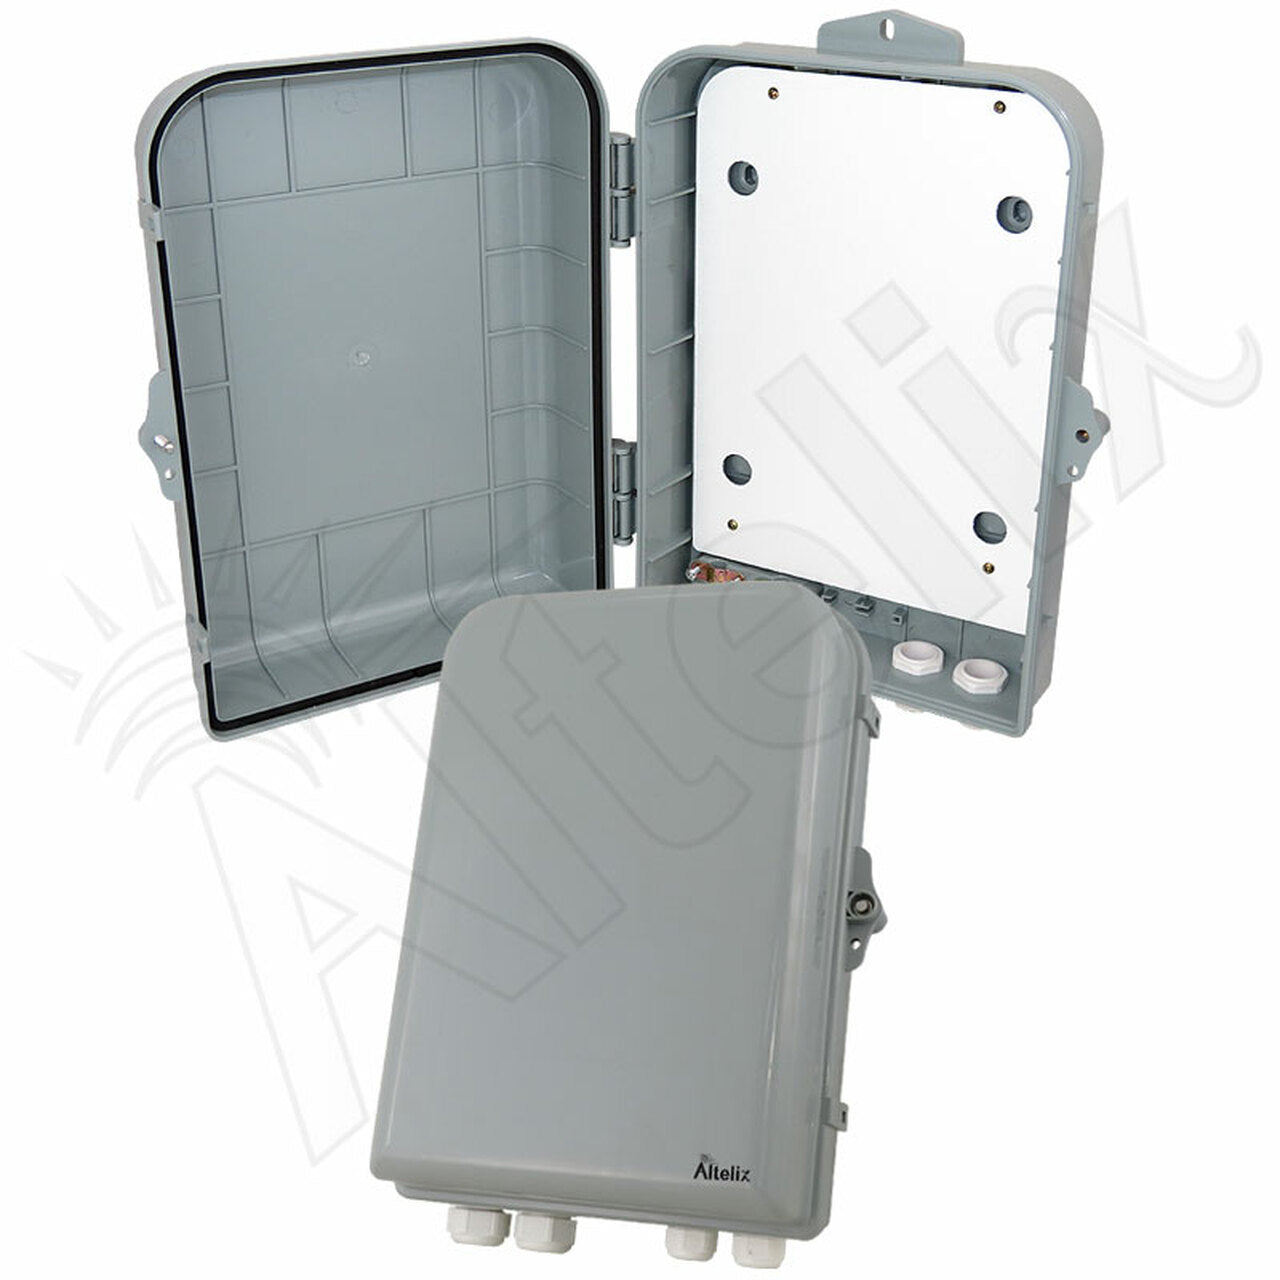 Altelix 15x10x5 Polycarbonate + ABS NEMA 4X RF Transparent Outdoor WiFi Enclosure with No-Drill PVC Equipment Mounting Plate